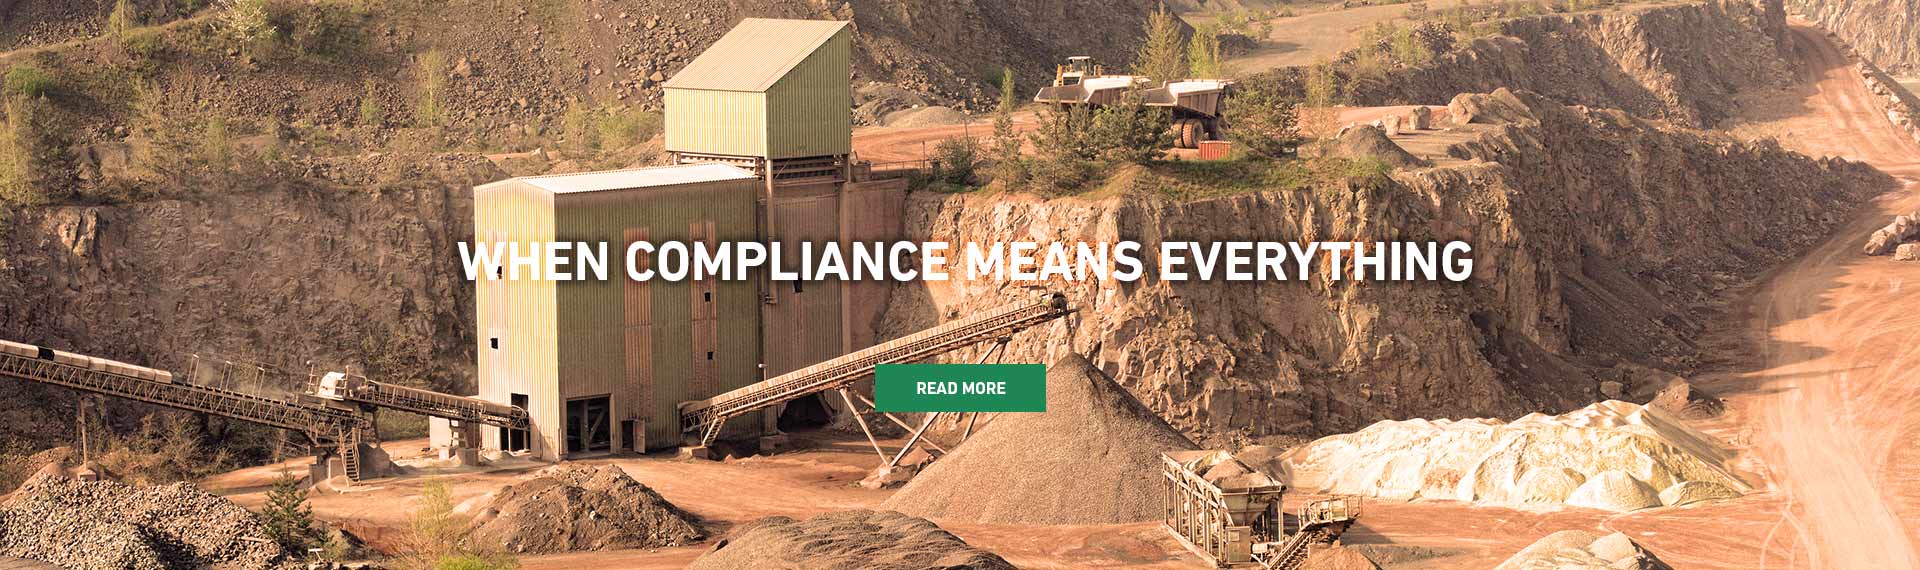 When Compliance means everything 